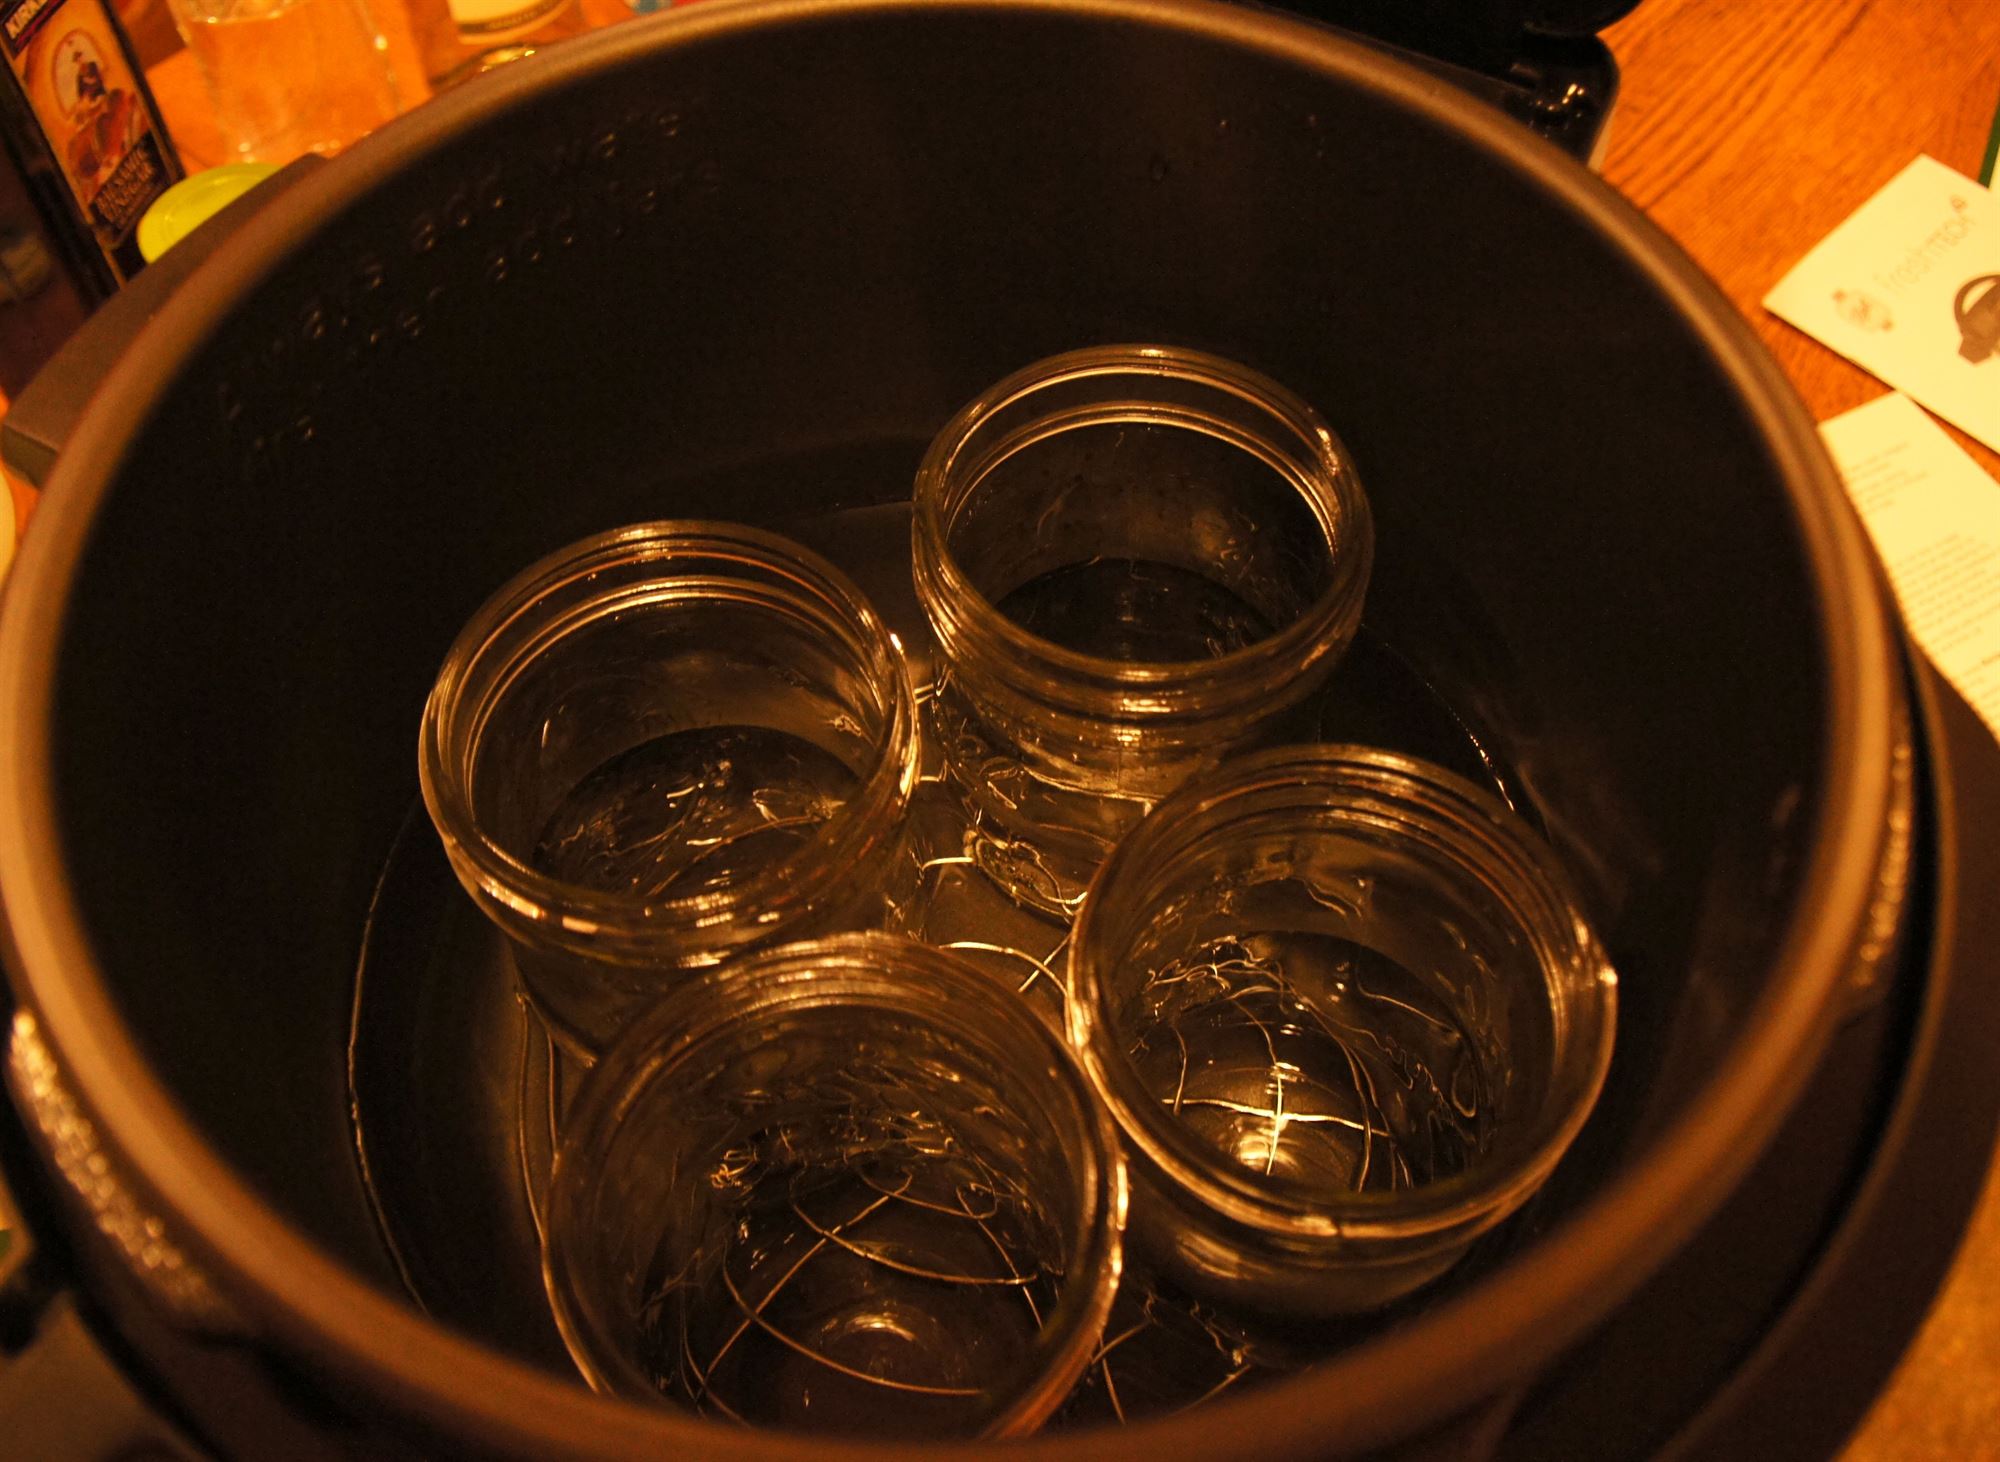 I filled the inner pot with water and inserted the empty jars to prepare them for preheating.